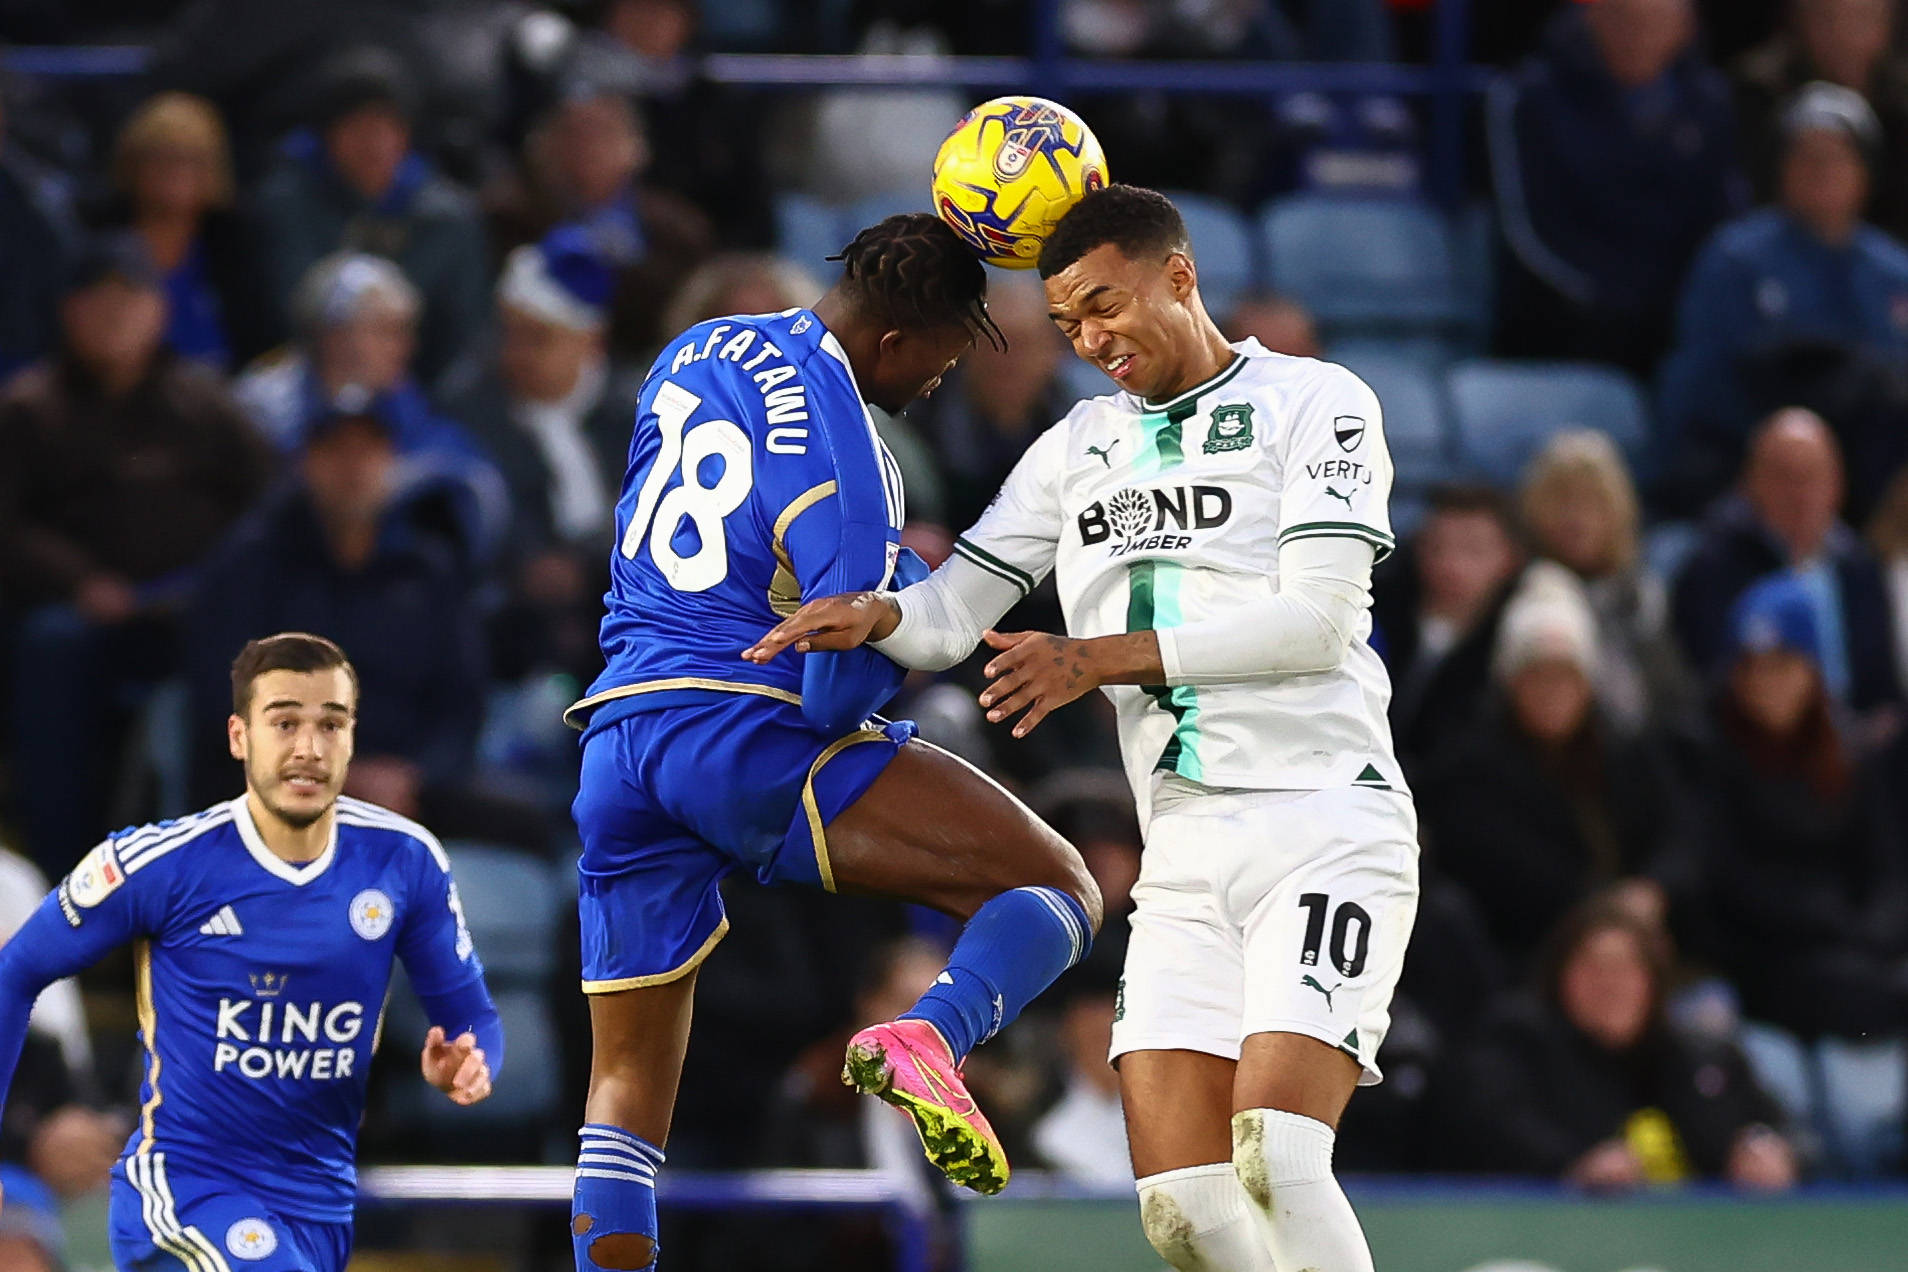 Leicester and Plymouth players compete for the ball in the air